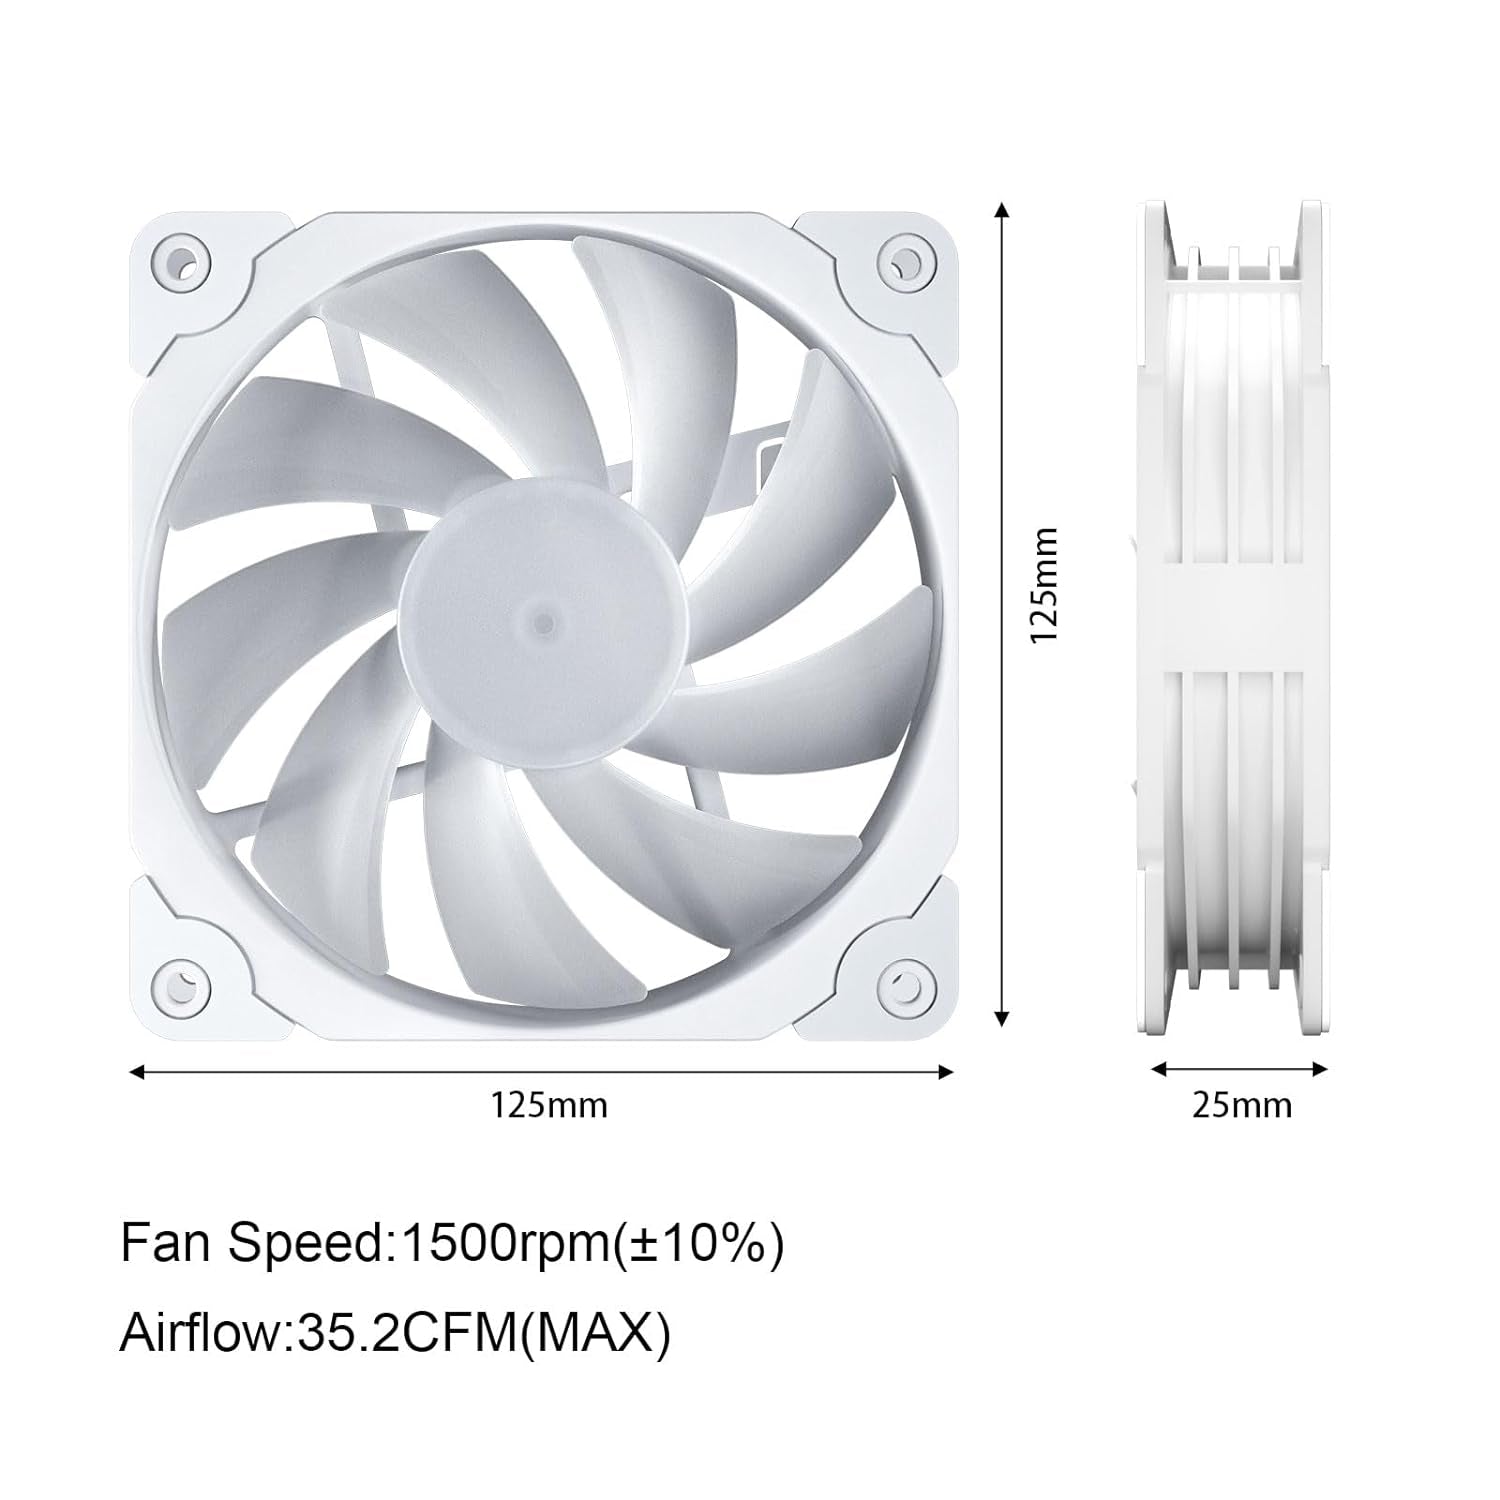 3 Pack 120Mm ARGB & PWM Case Fans with Controller High Airflow Addressable RGB Motherboard Sync Computer PC Cooling Fans